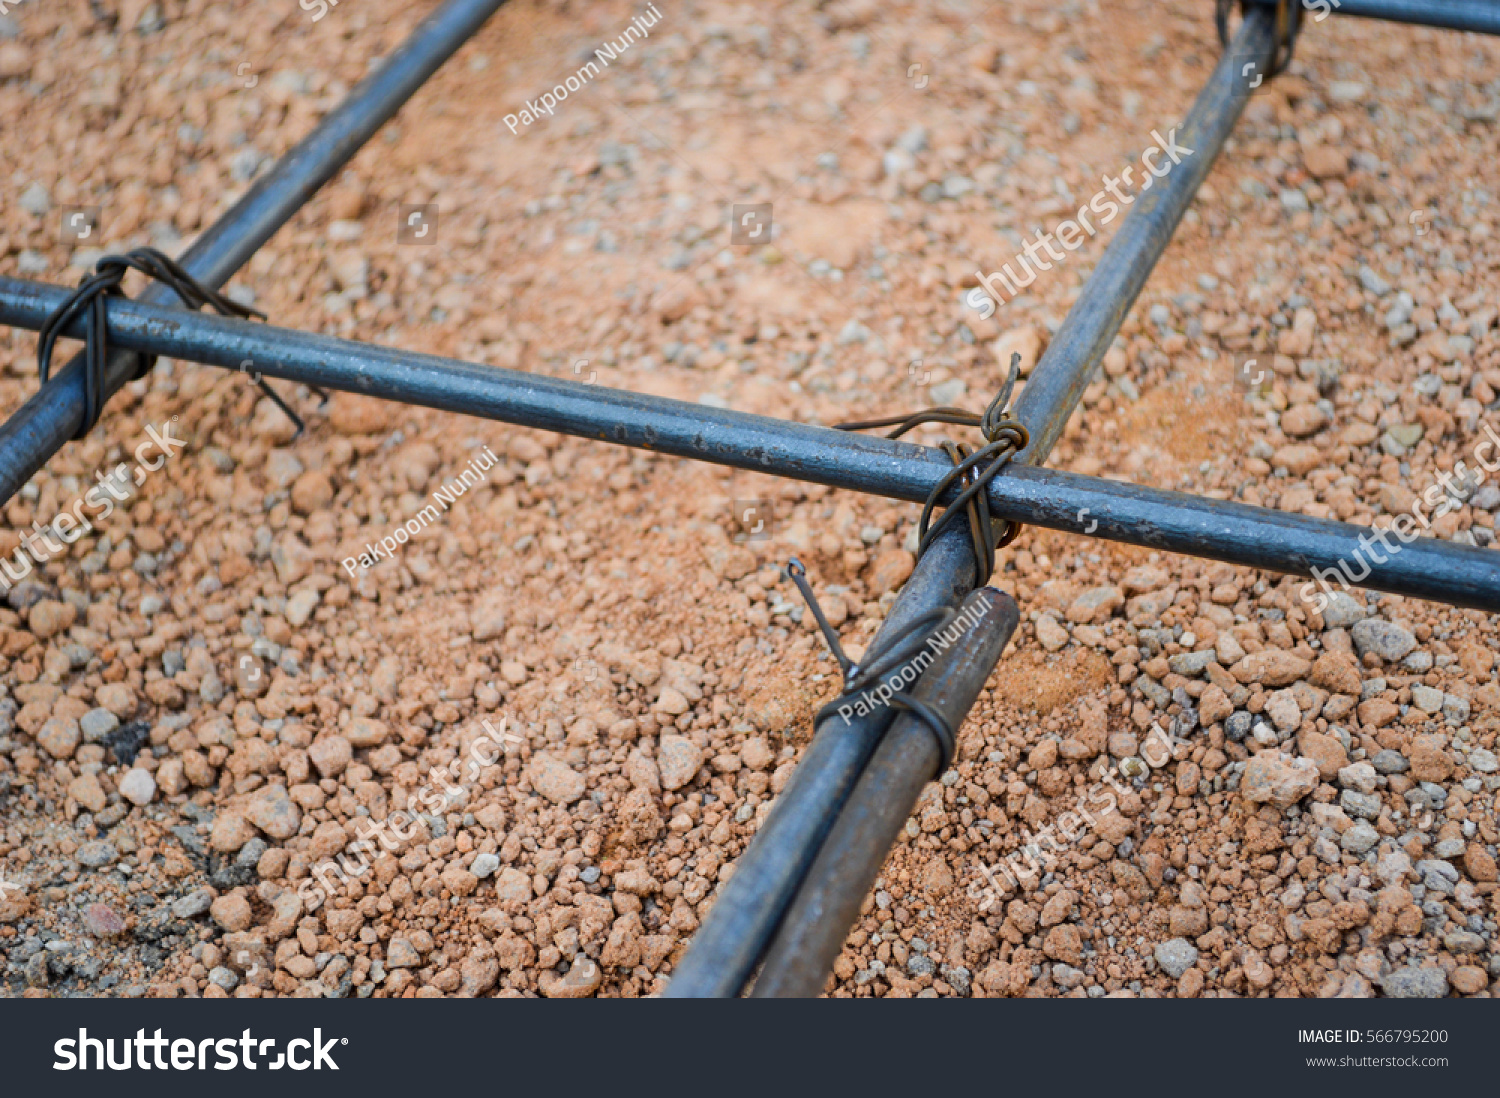 Steel rod or steel bar that was cross connected by steel wire for prepare to concrete pouring construction, reinforcement metal framework for concrete pouring #566795200